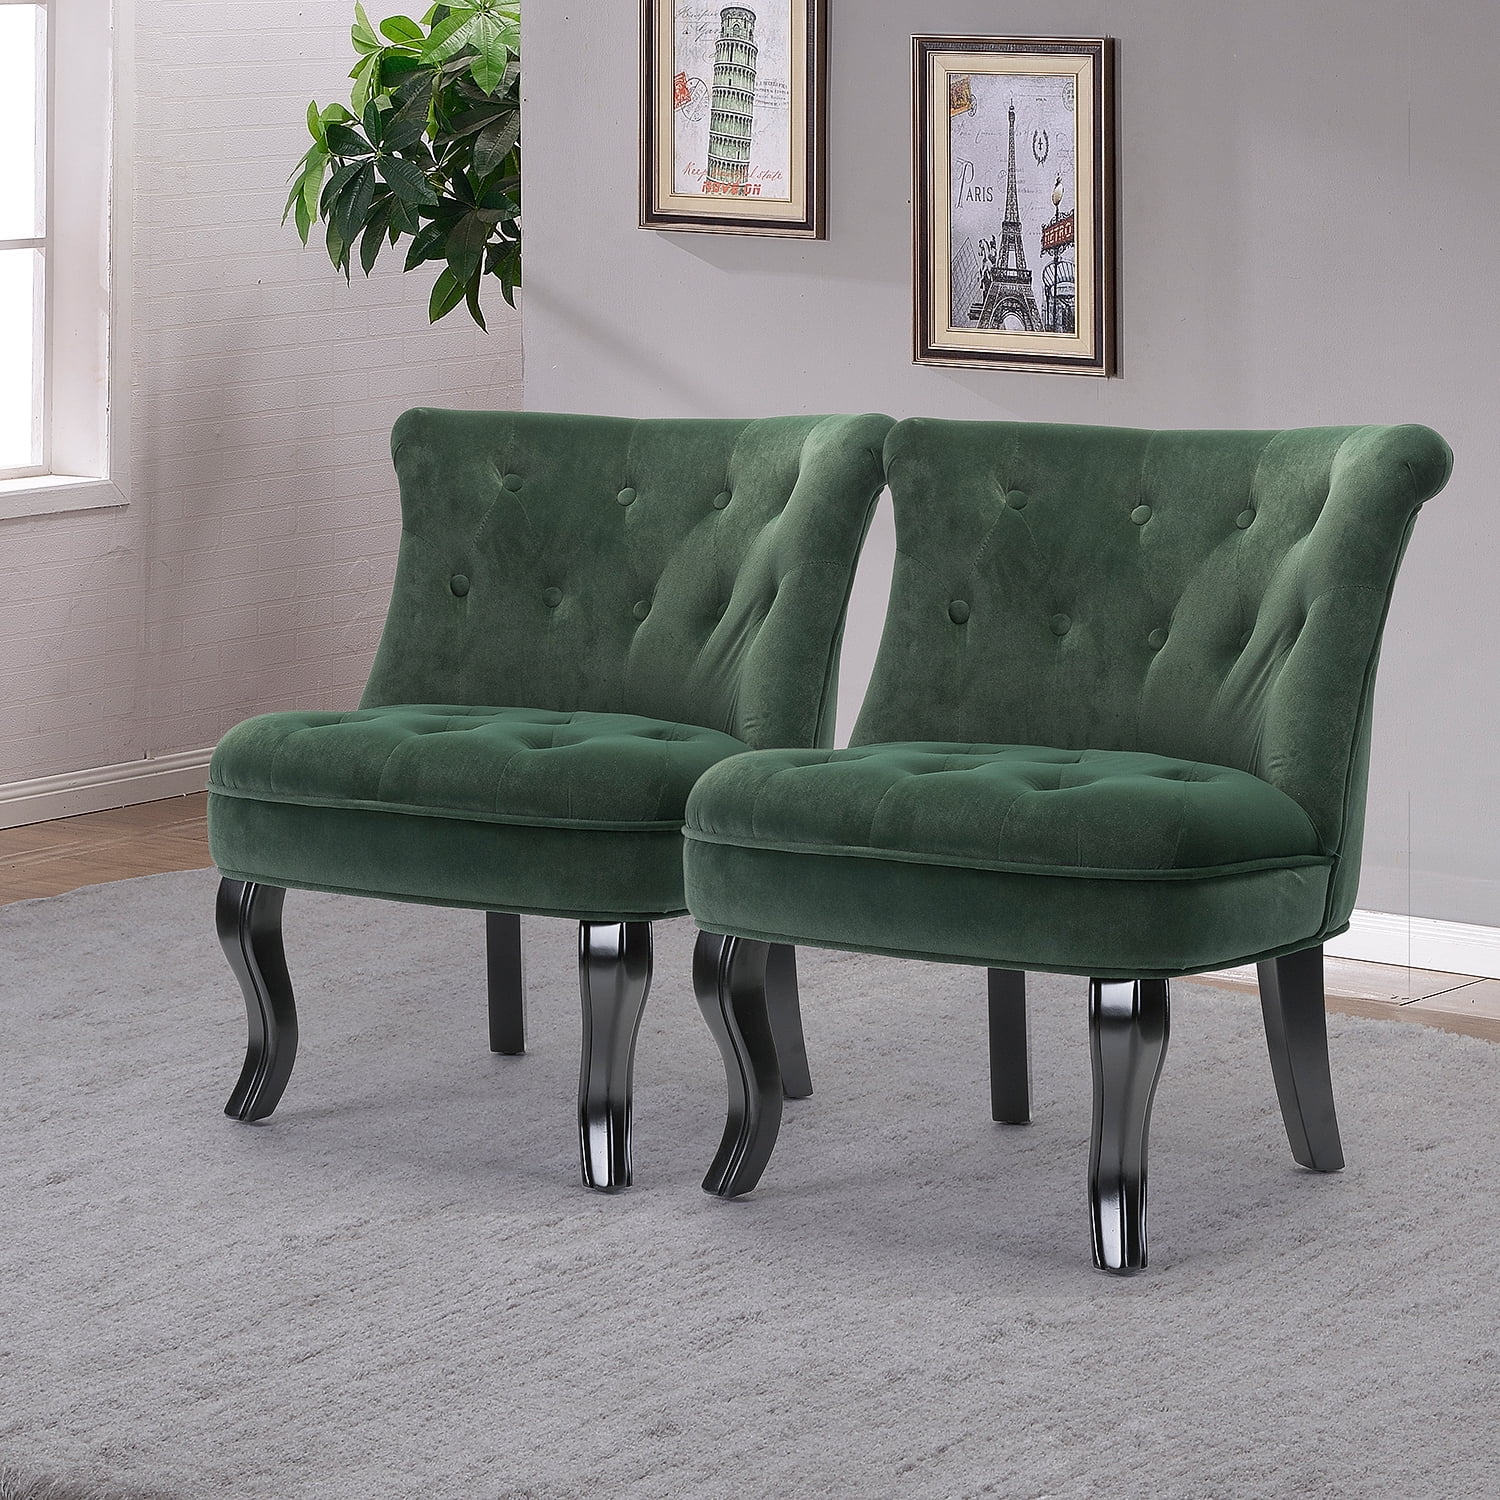 Green Magshion SpaceSaving Dining Living Room Table Side Guest Chairs Fabric Upholstered